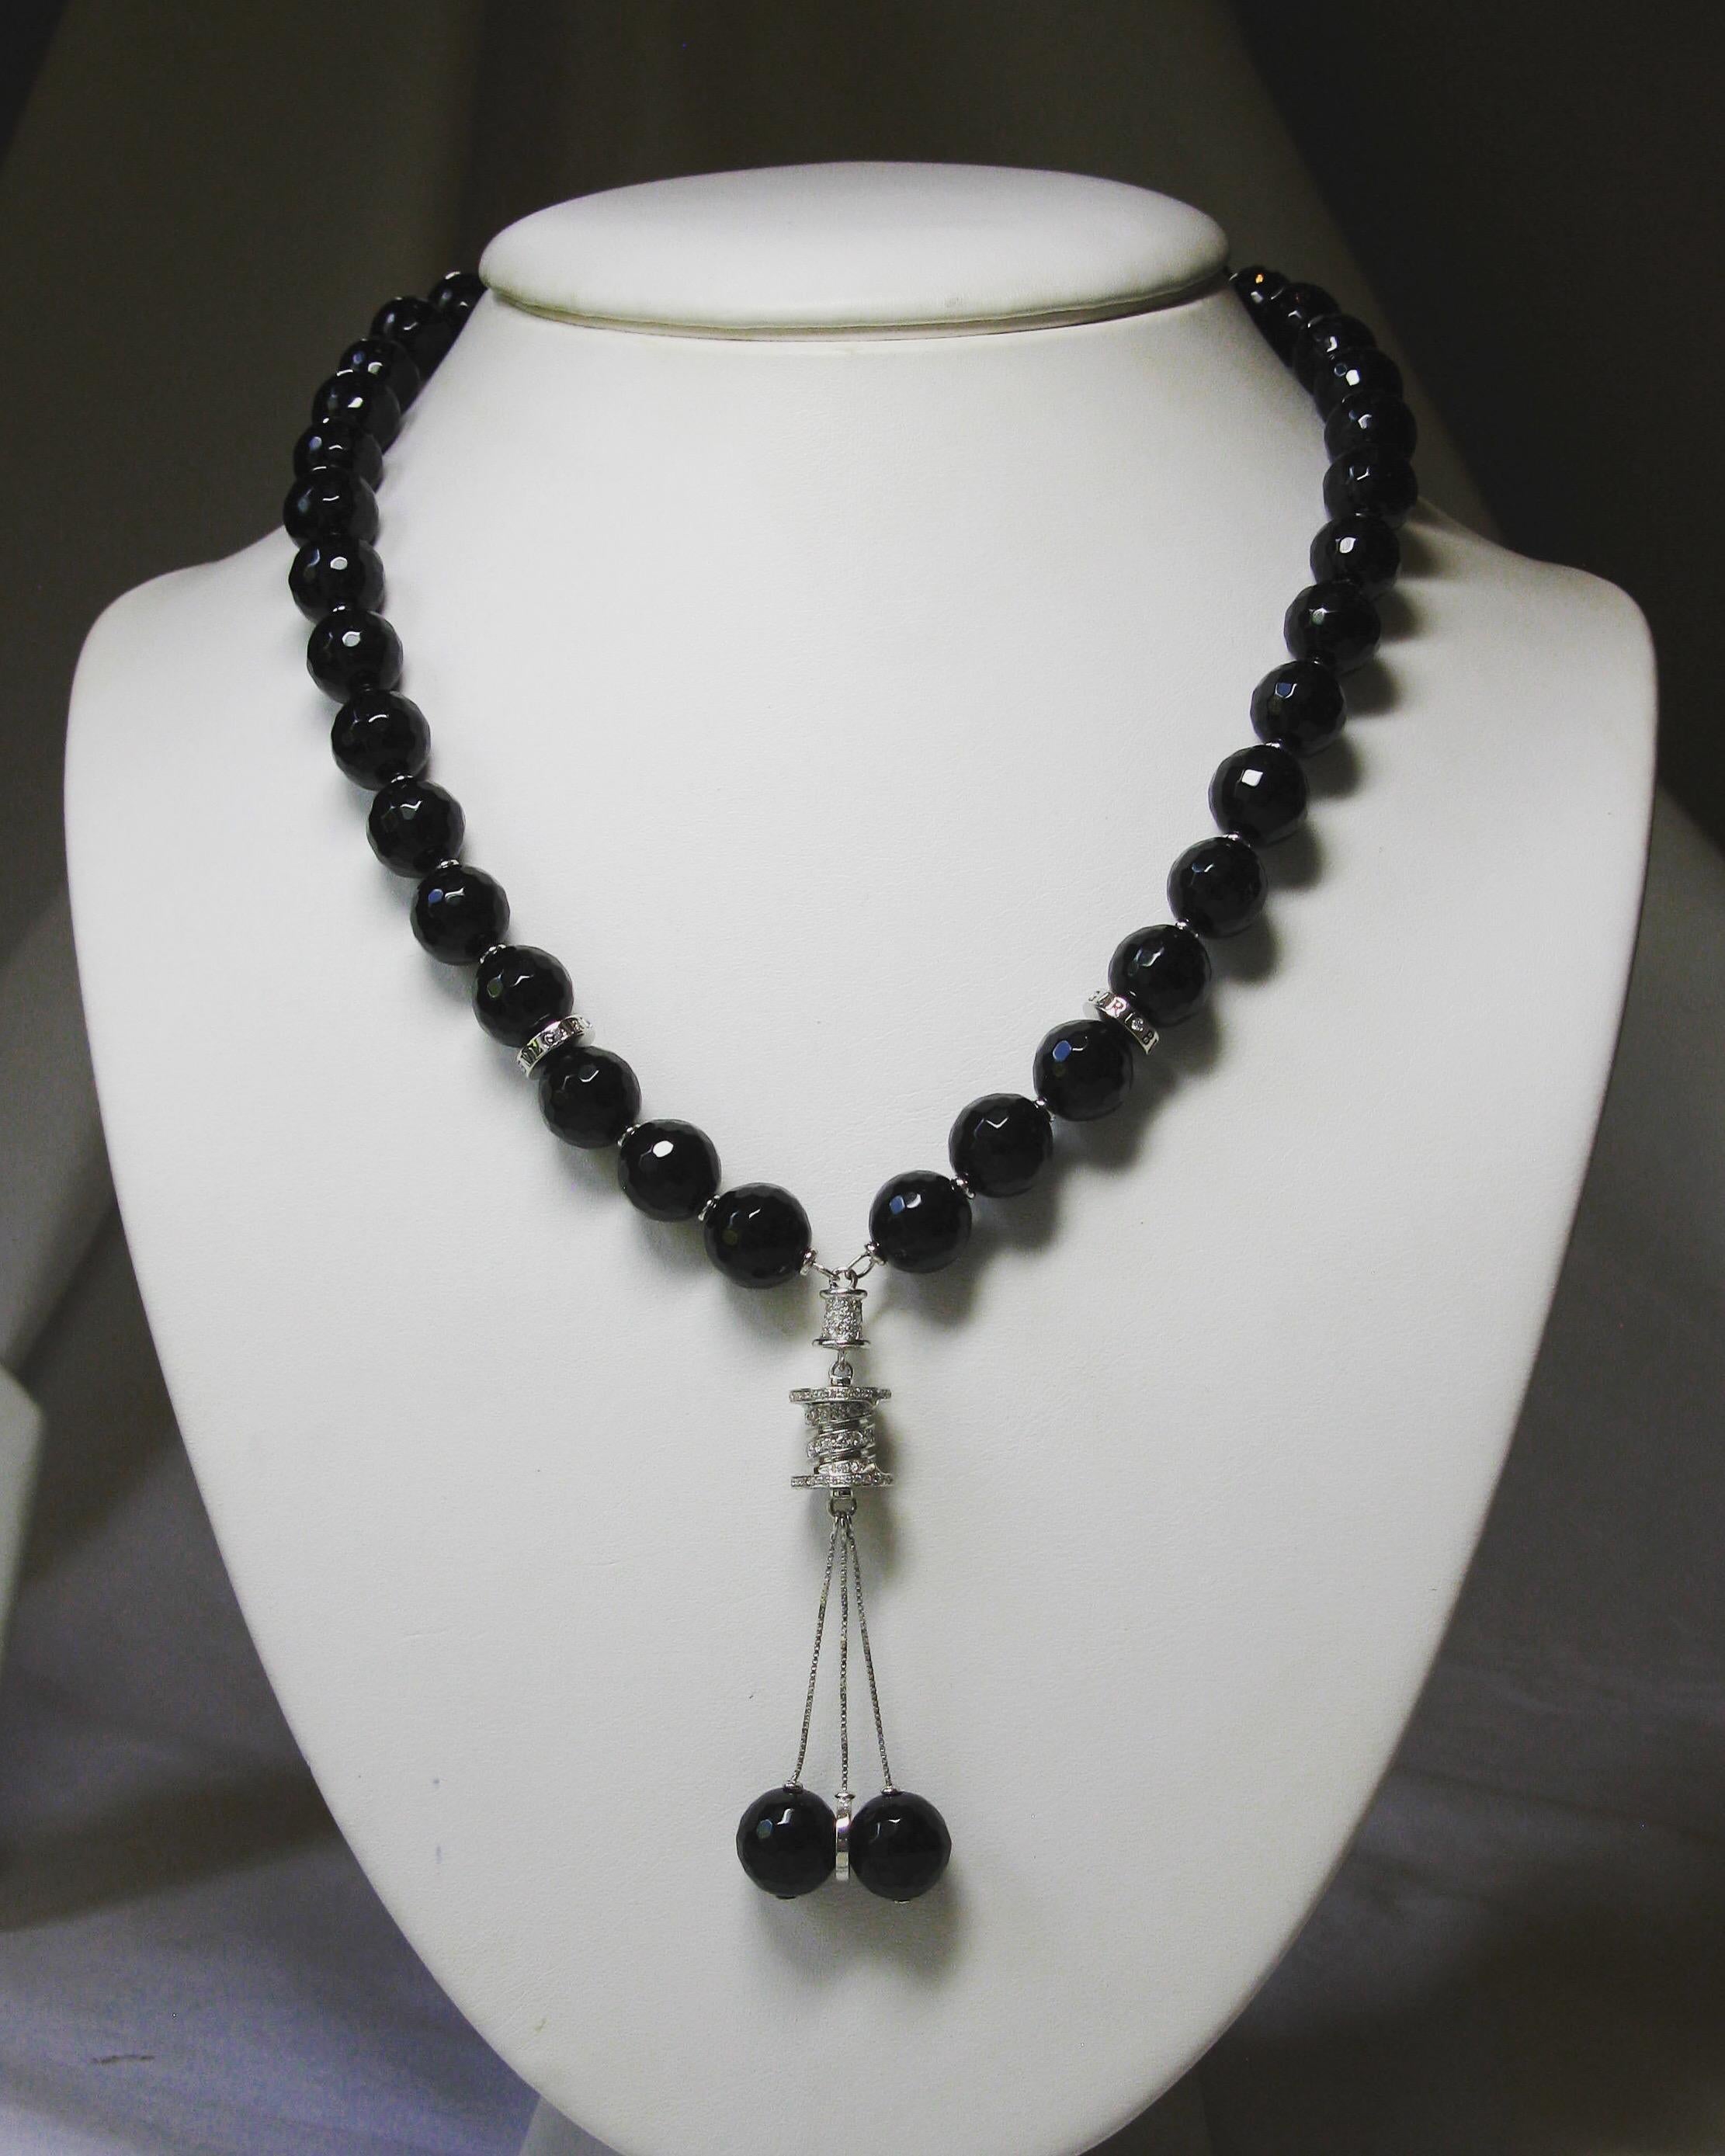 This is a gorgeous vintage Bvlgari, Bulgari B.zero necklace in the lariat style with faceted Black Onyx Beads and Diamonds in 18 Karat White Gold.  This Bvlgari necklace is an absolute stunner!  The necklace features faceted black onyx beads of